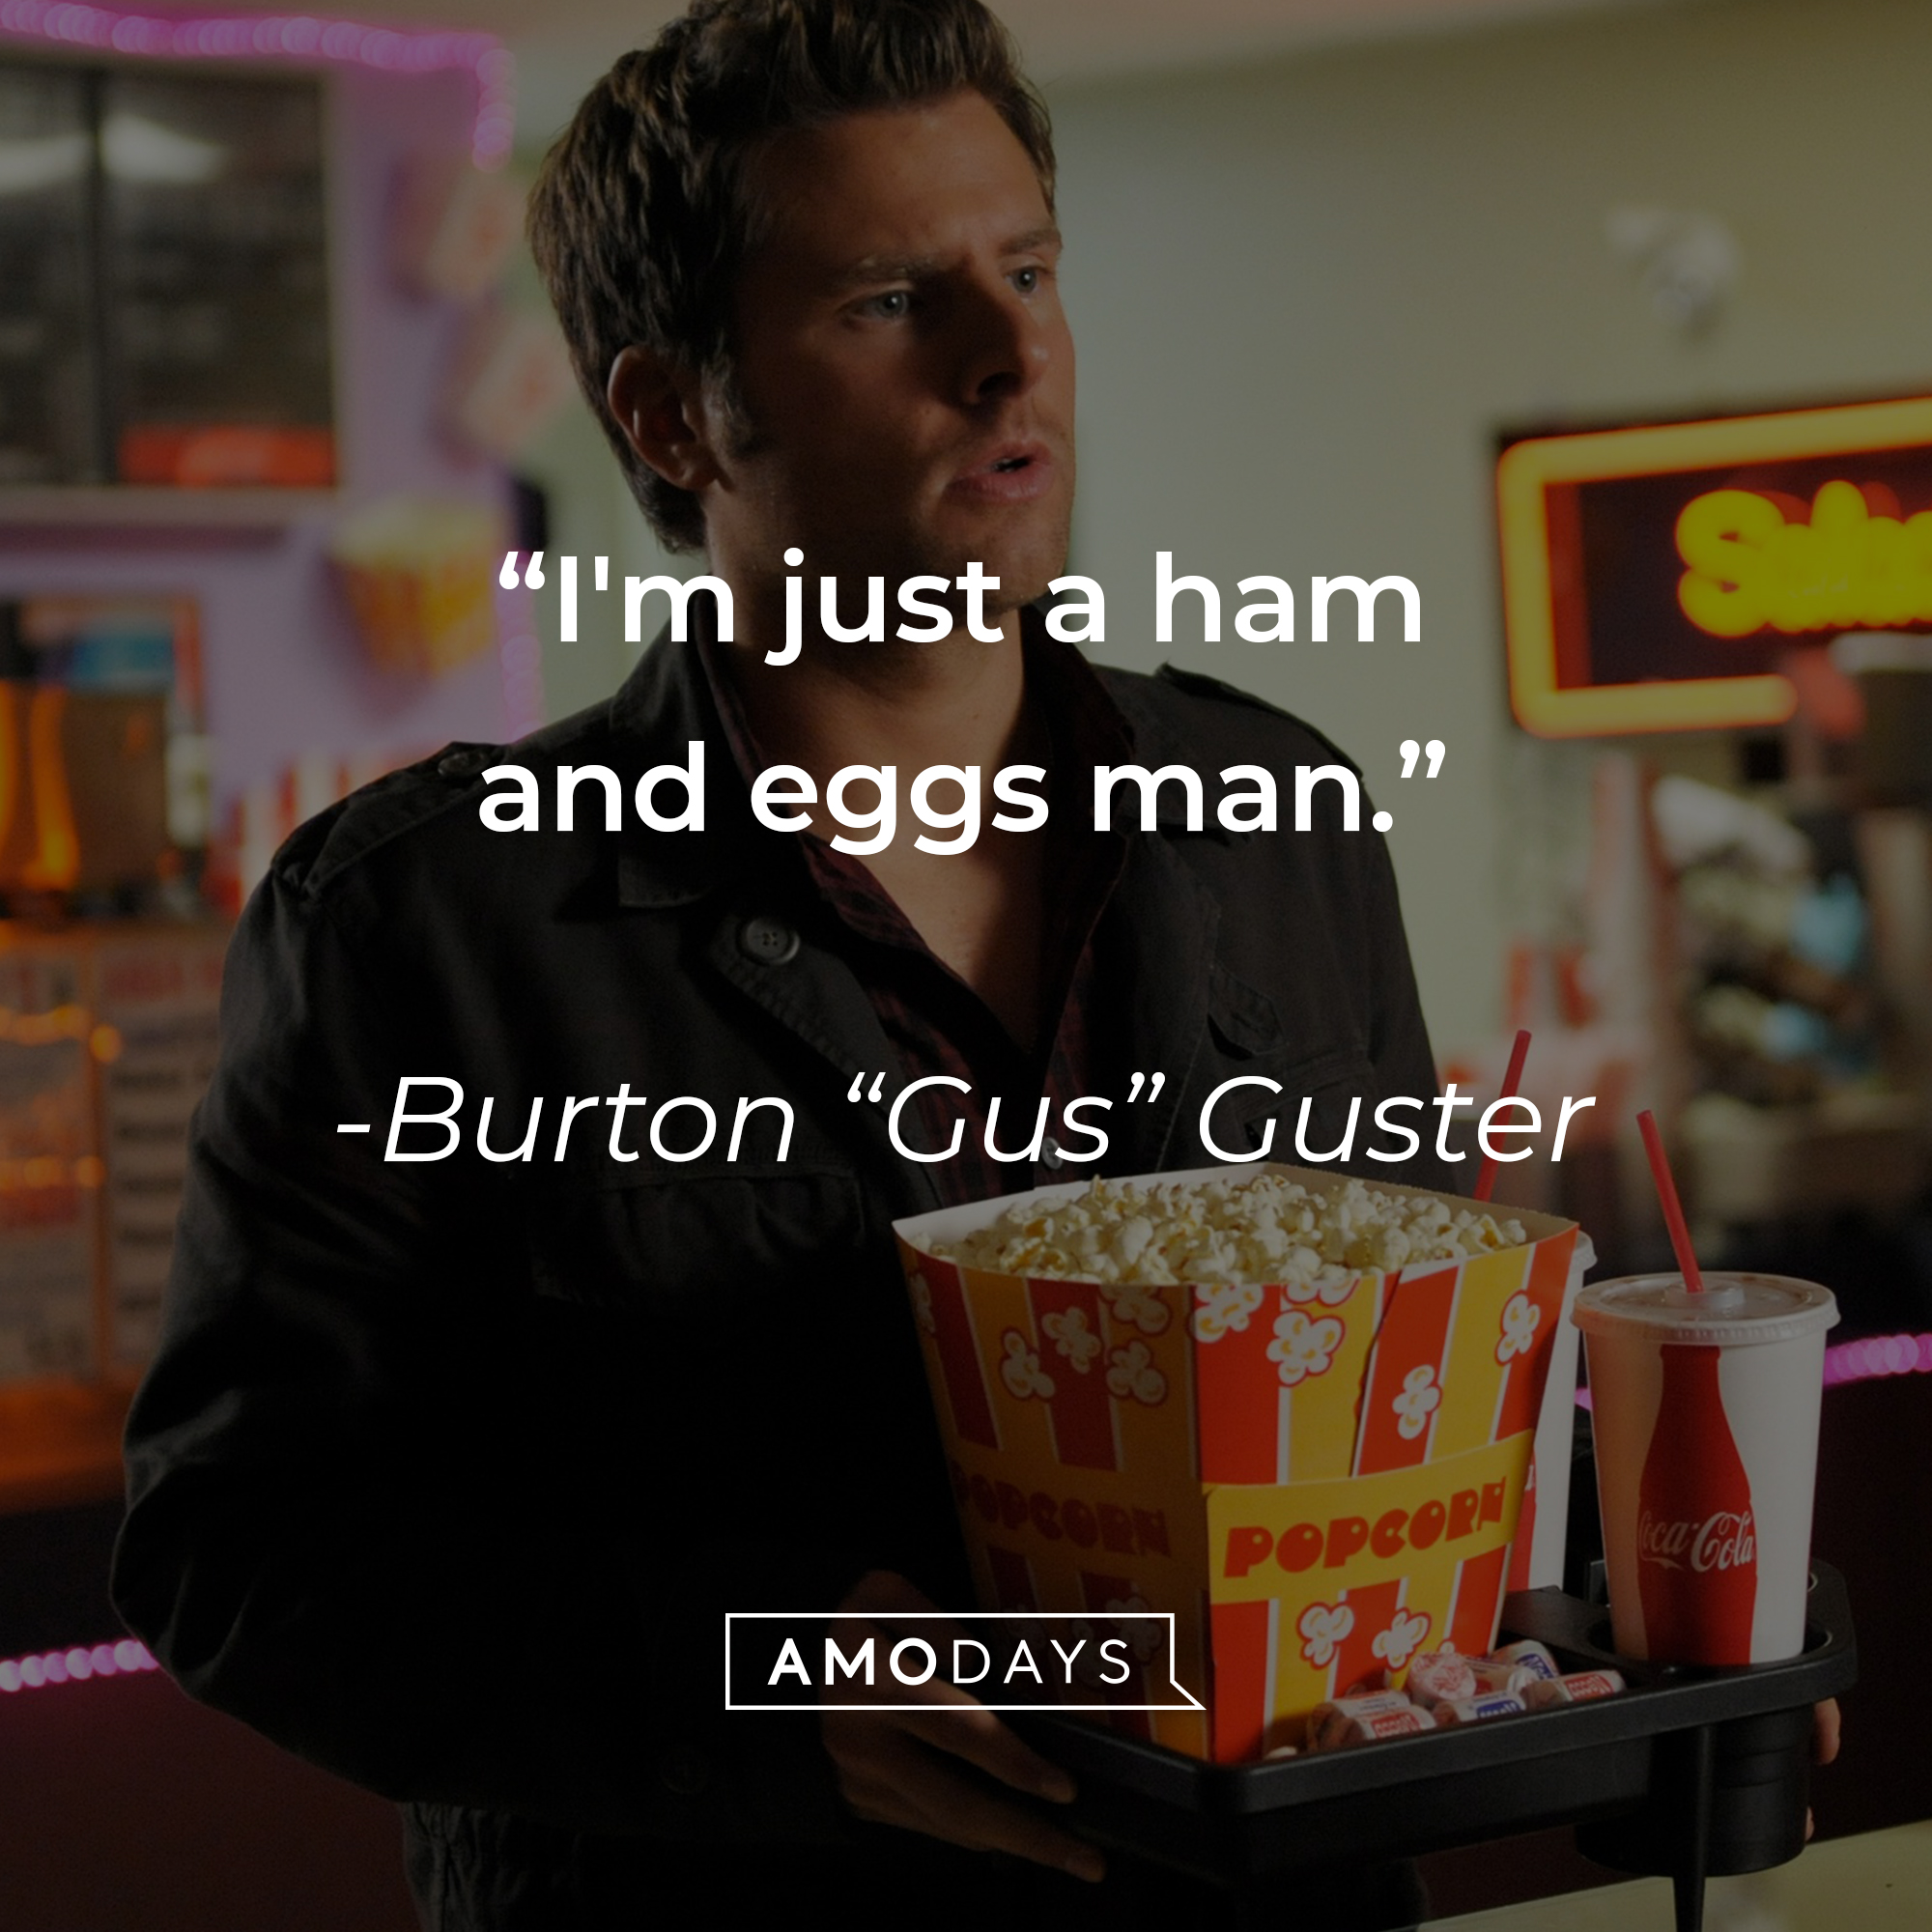 Shawn Spencer, with Burton “Gus” Guster’s quote: “I'm just a ham and eggs man.” | Source: facebook.com/PsychPeacock